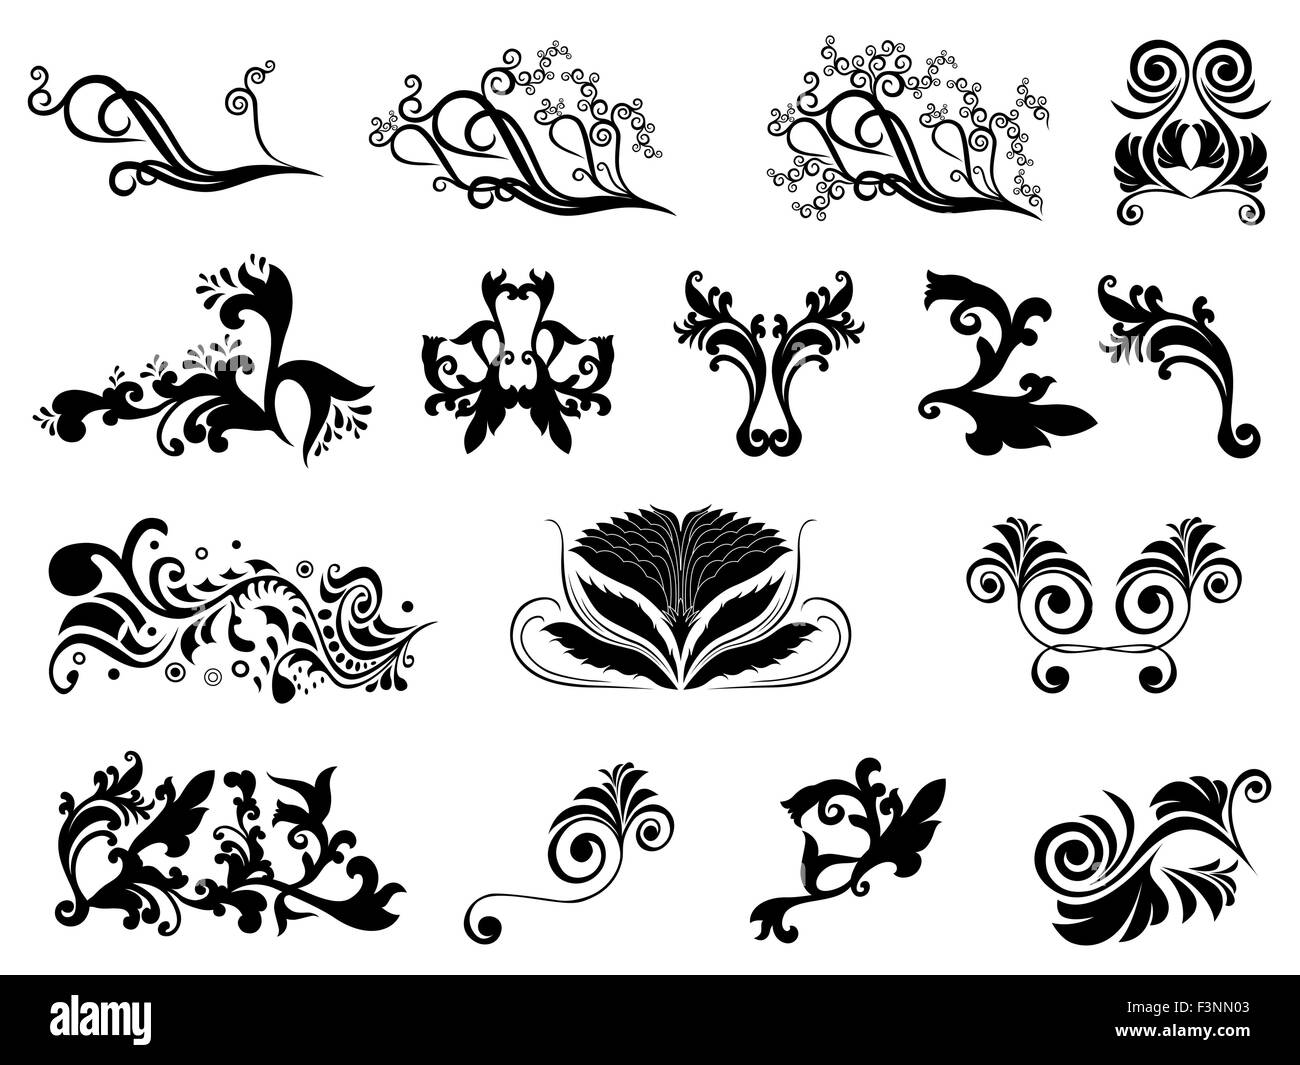 Set of black silhouettes of floral design elements isolated over white, hand drawing vector illustration Stock Vector